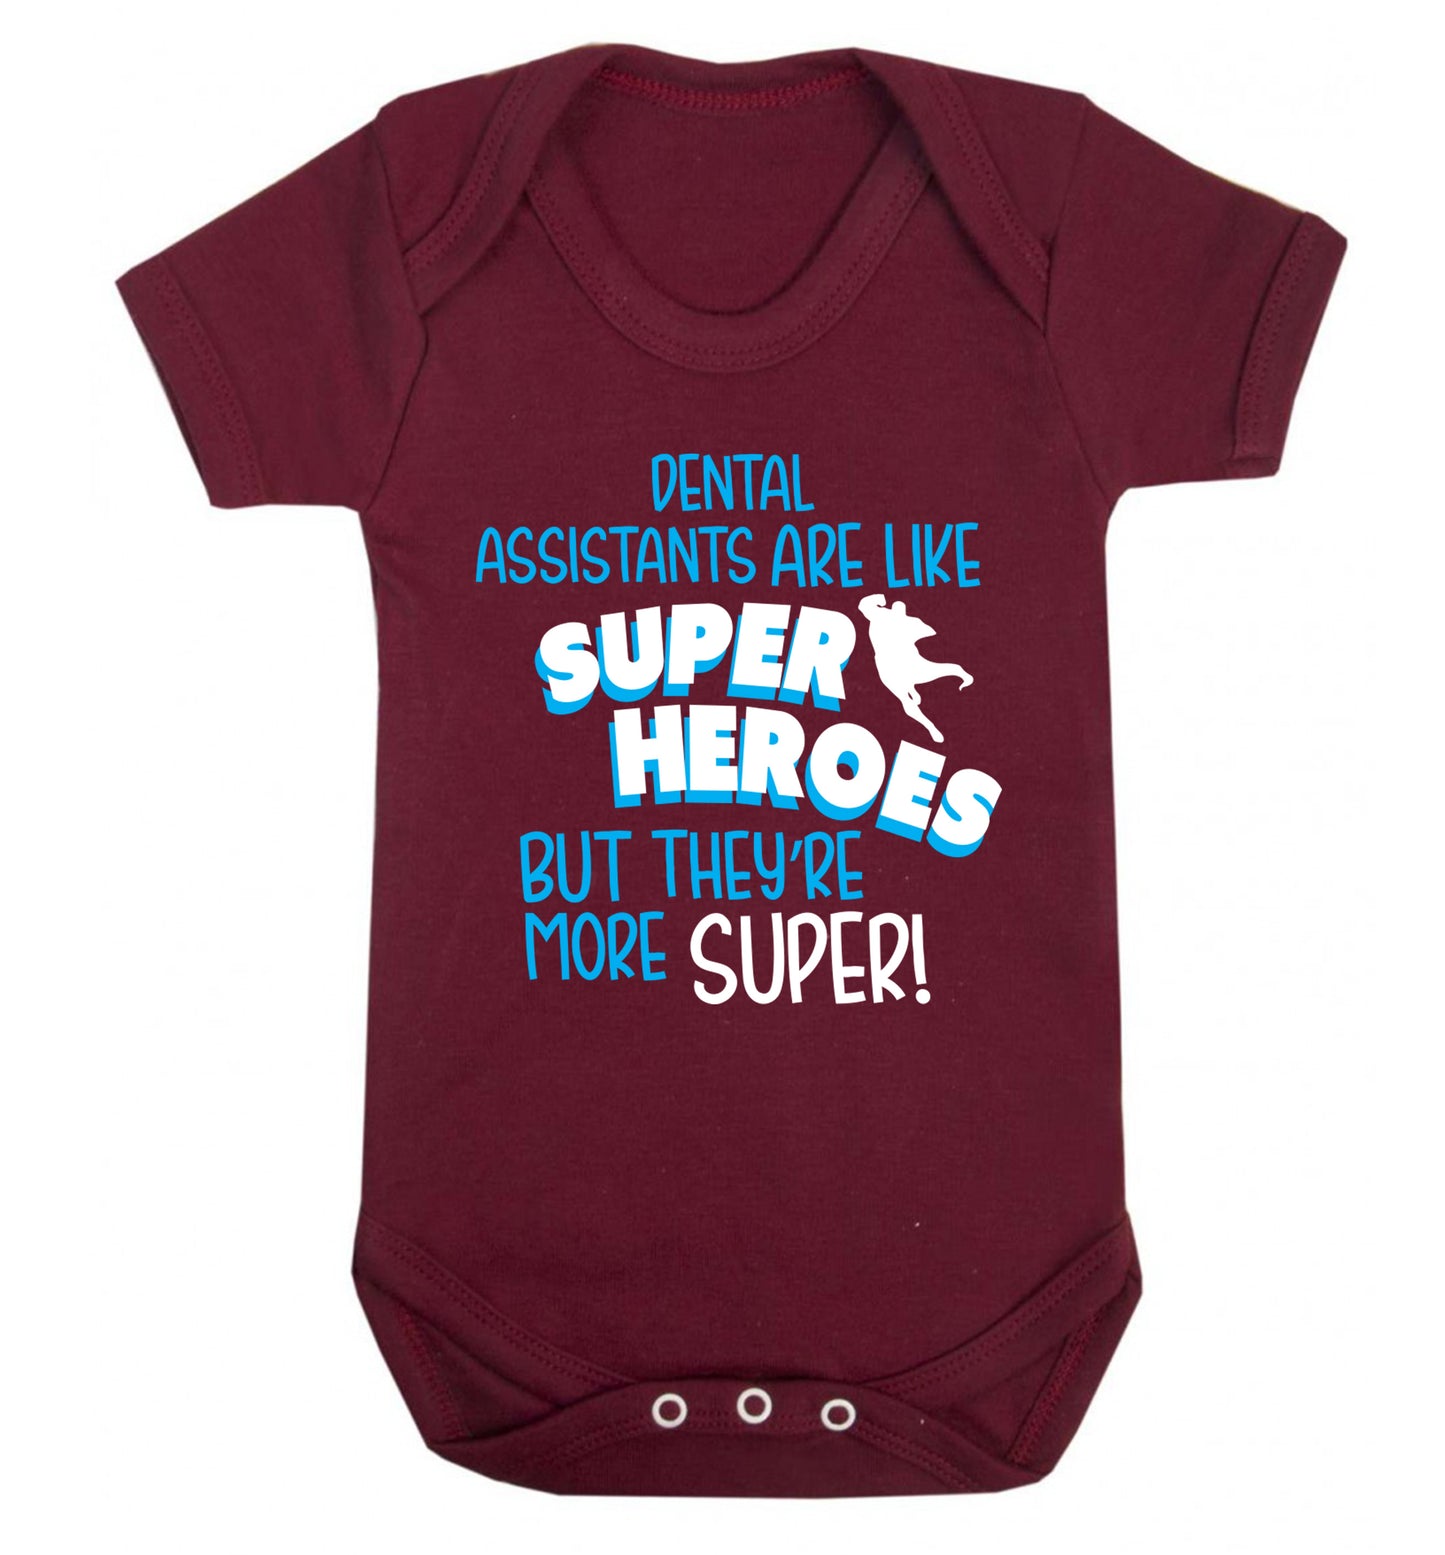 Dental Assistants are like superheros but they're more super Baby Vest maroon 18-24 months